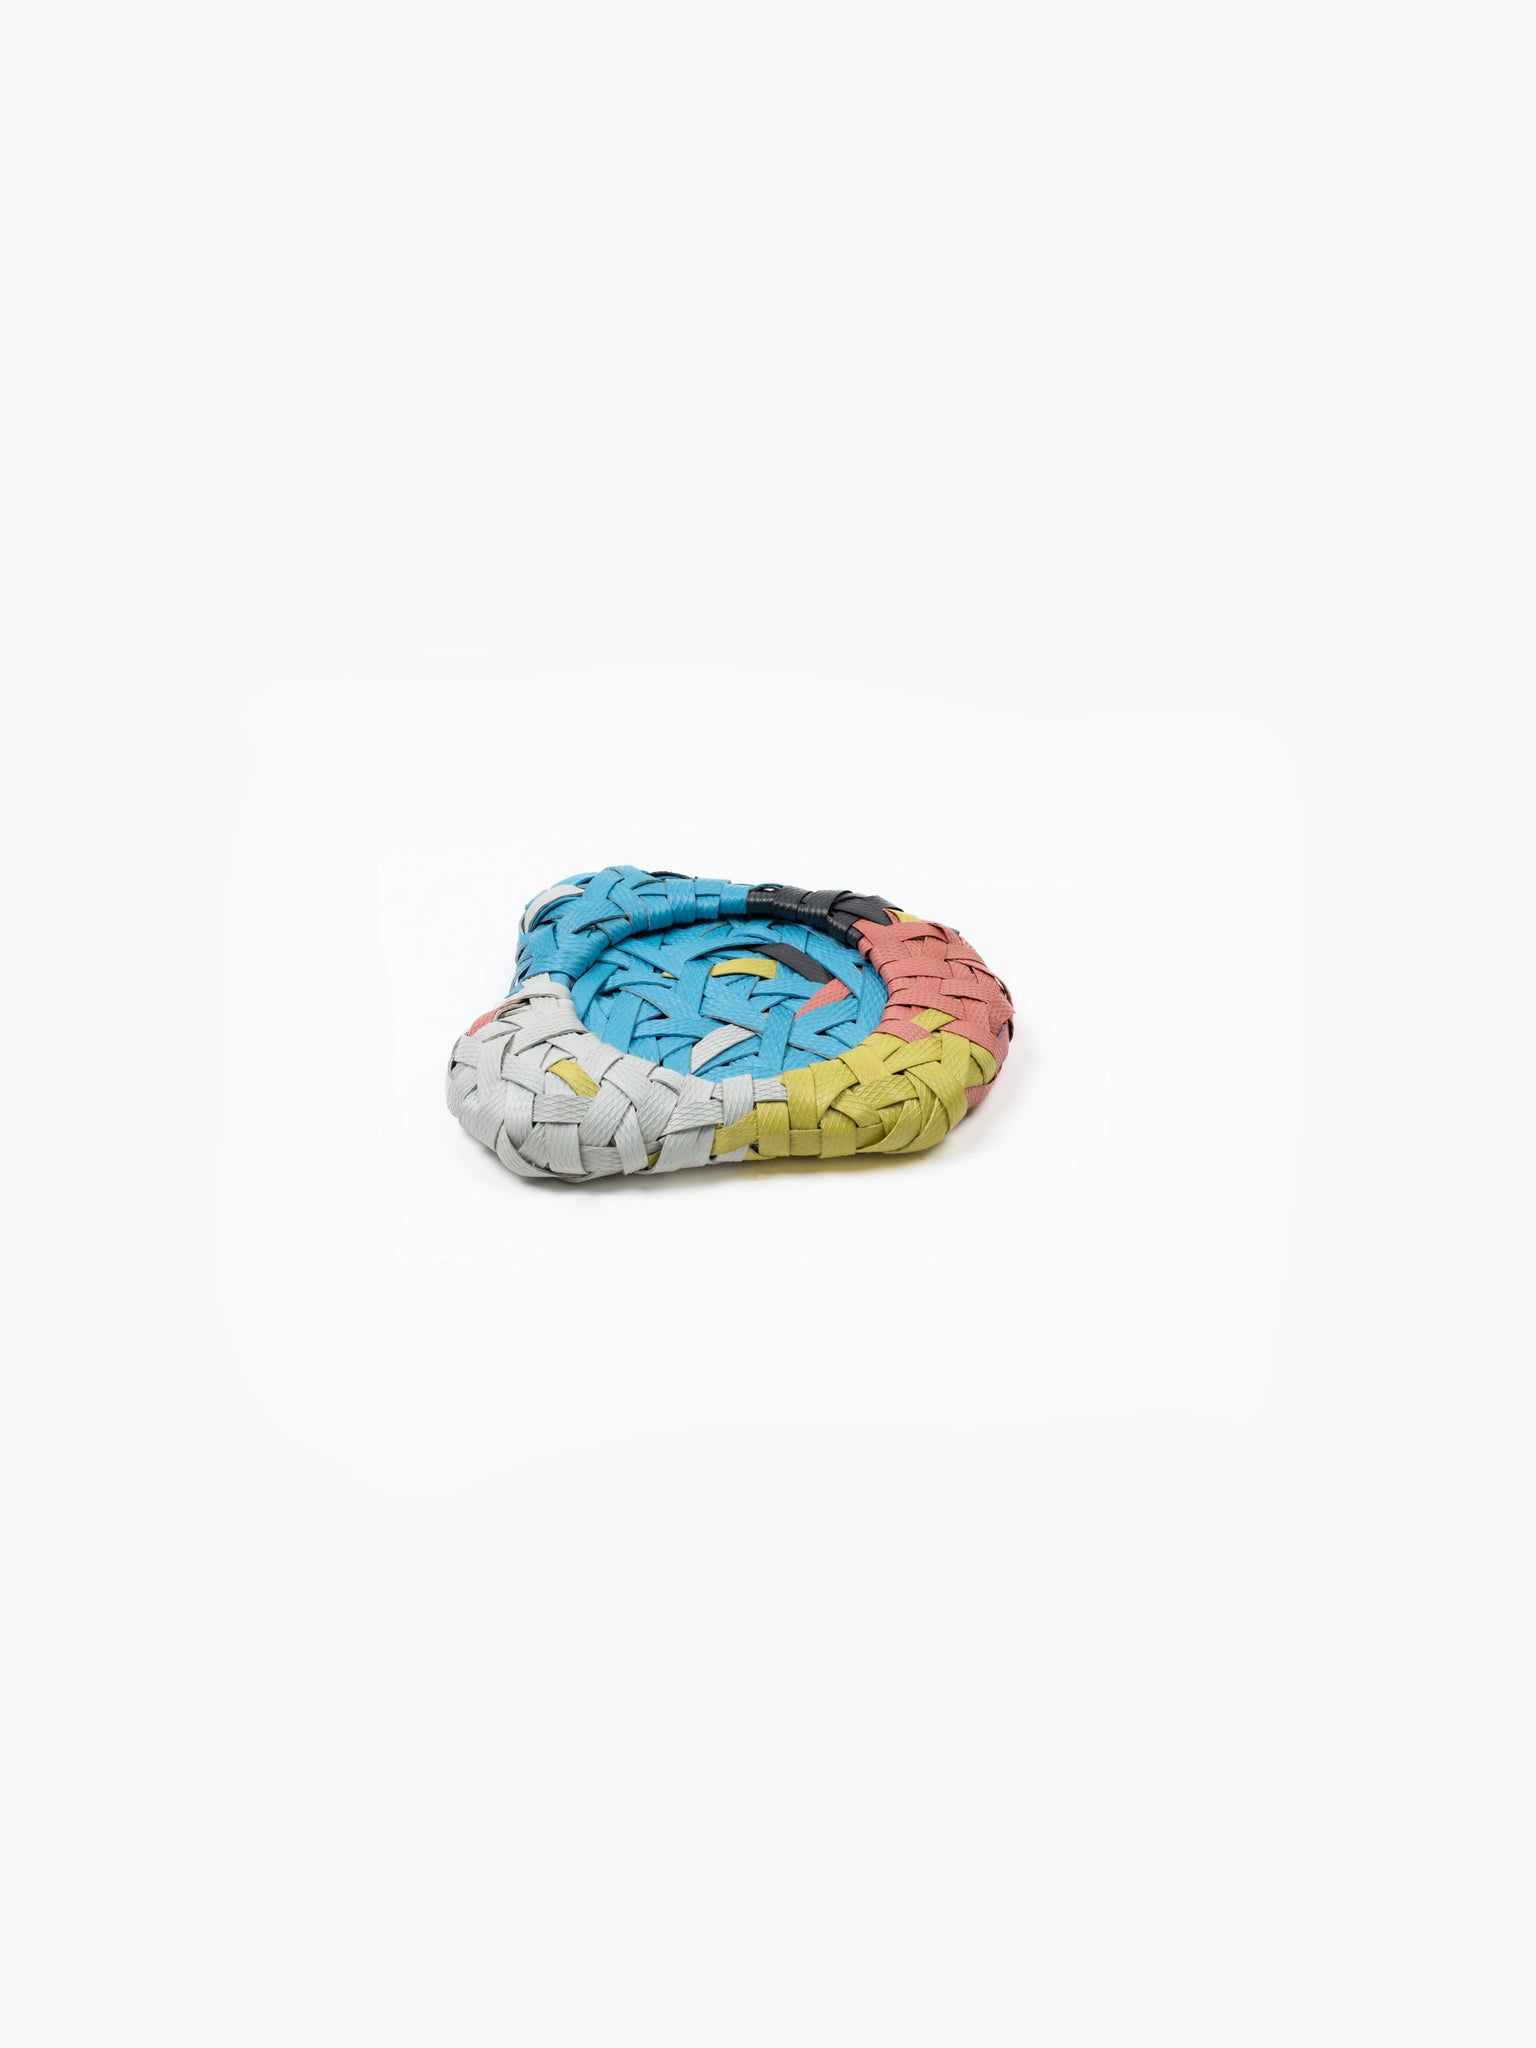 Recycled Plastic Woven Ecology Coaster Multicolour